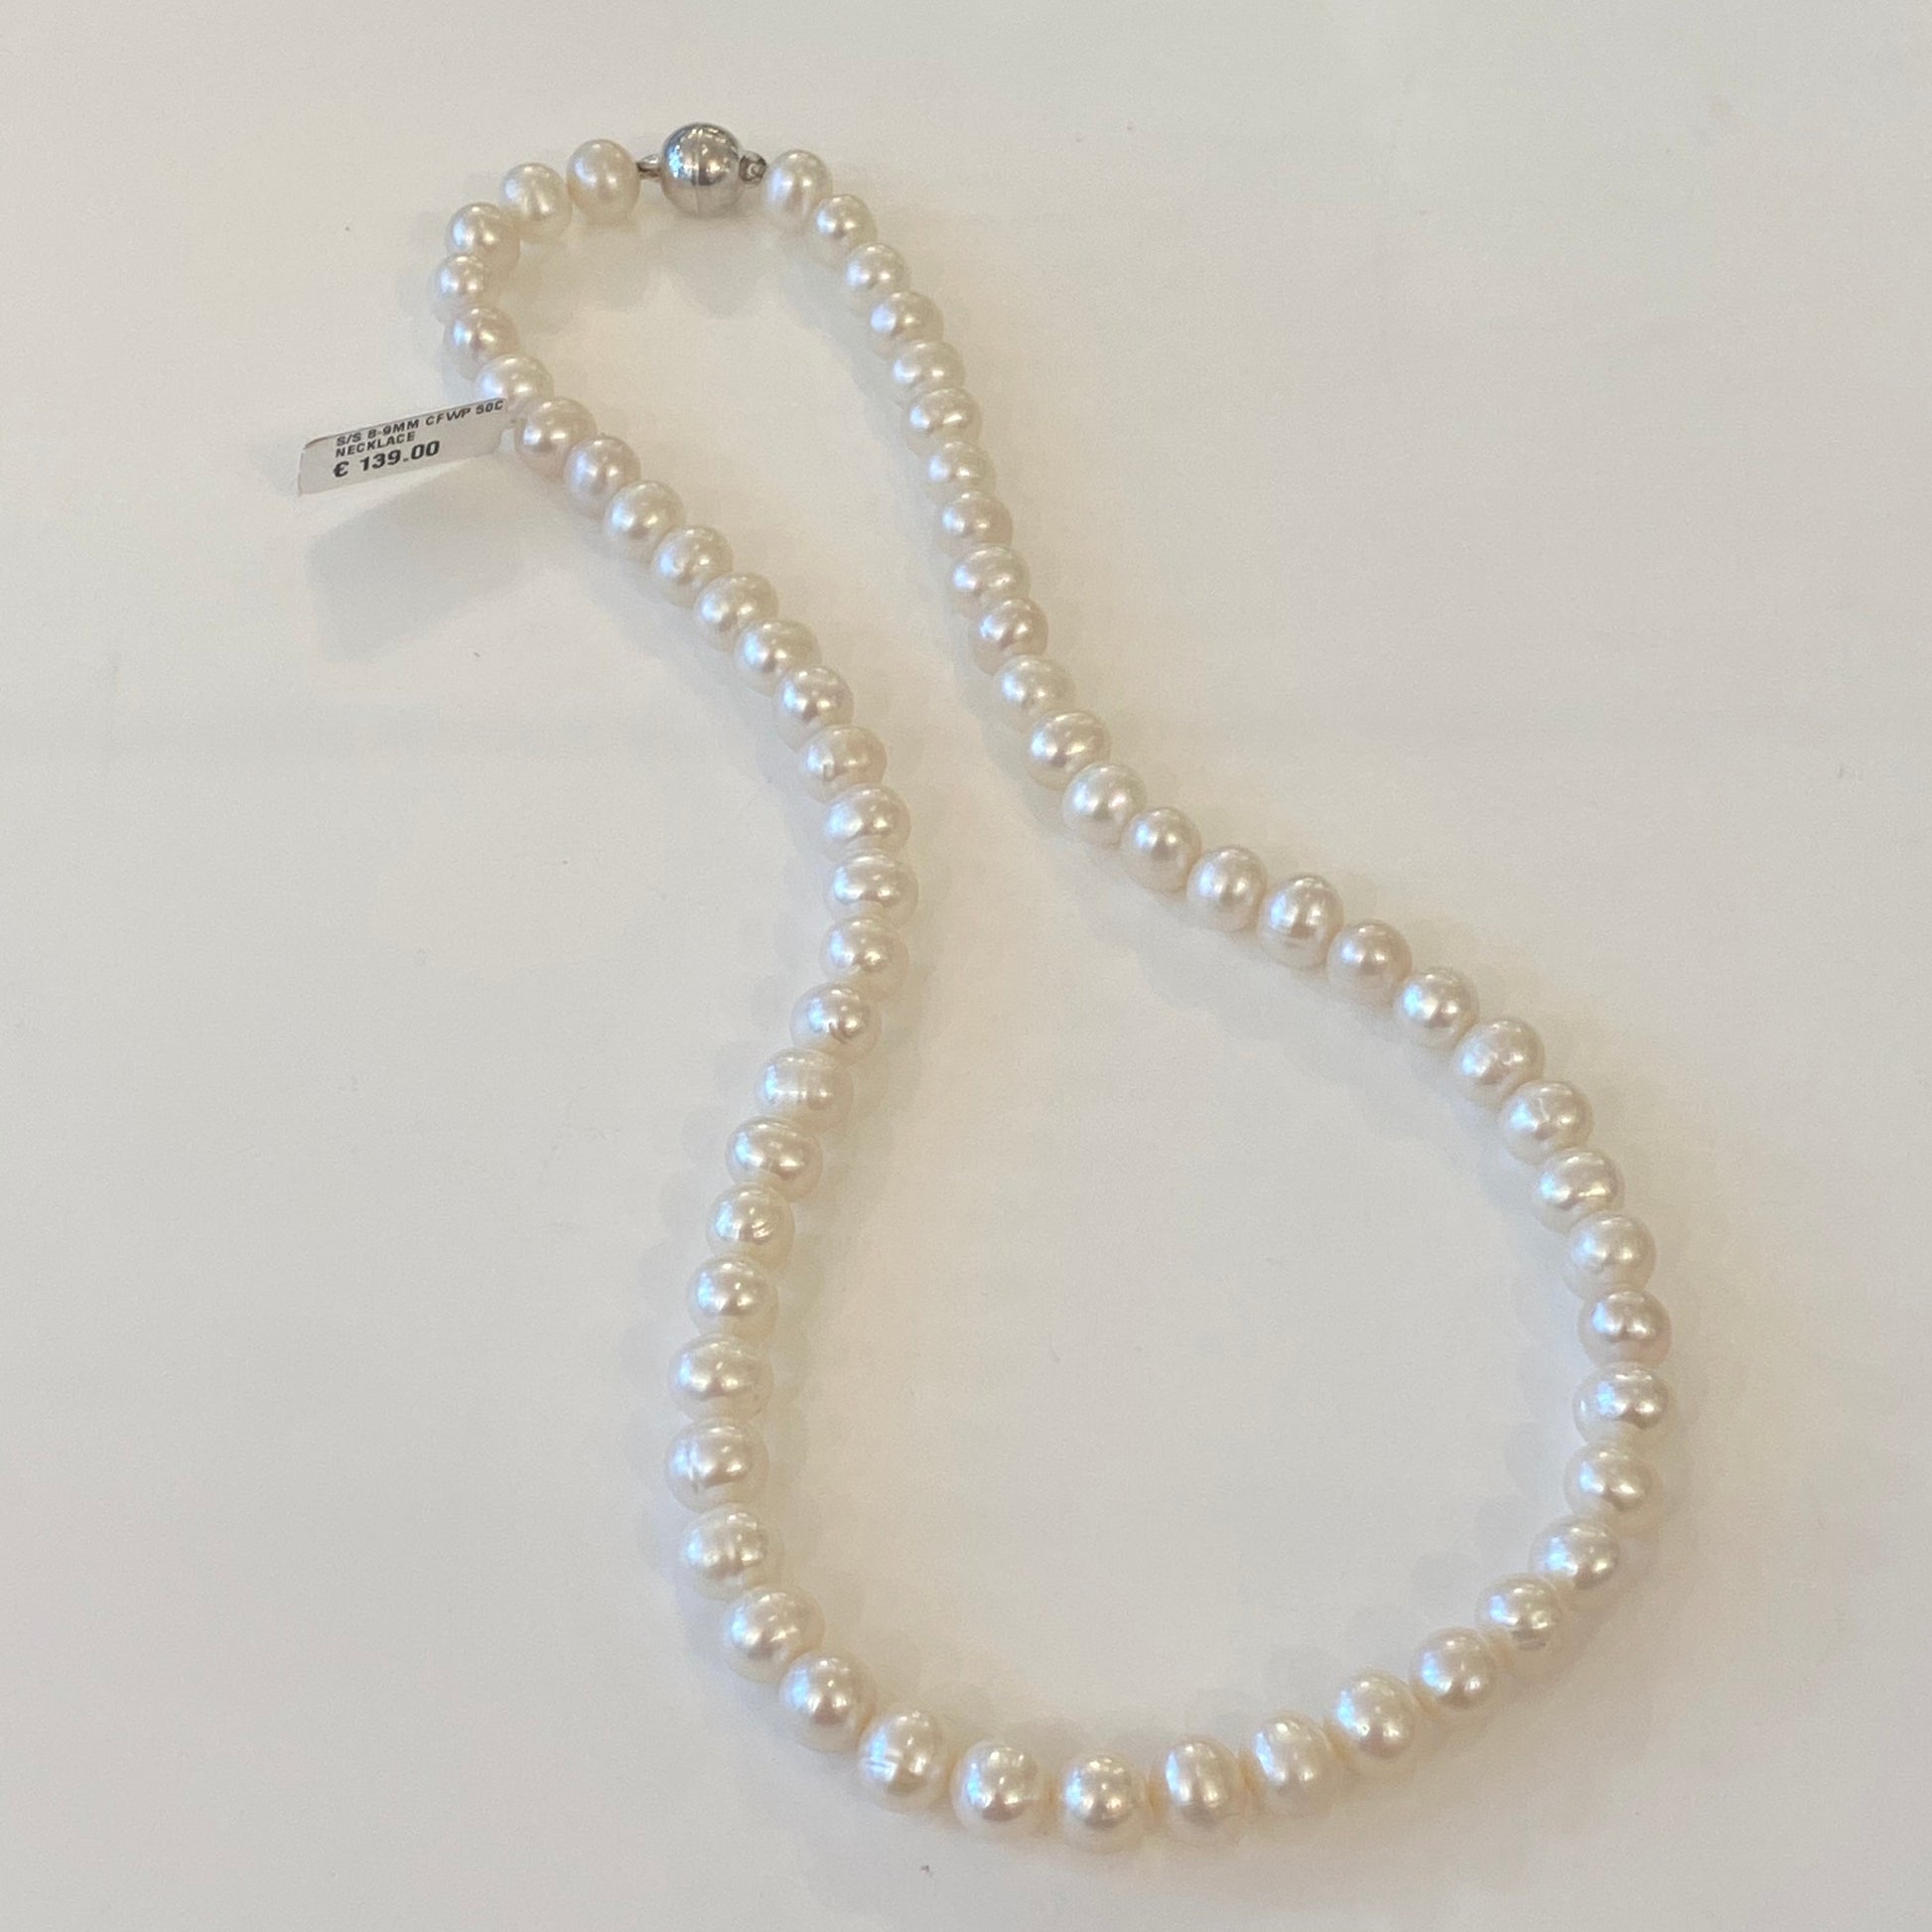 Silver 8-9mm Cfwp 50cm Necklace - John Ross Jewellers